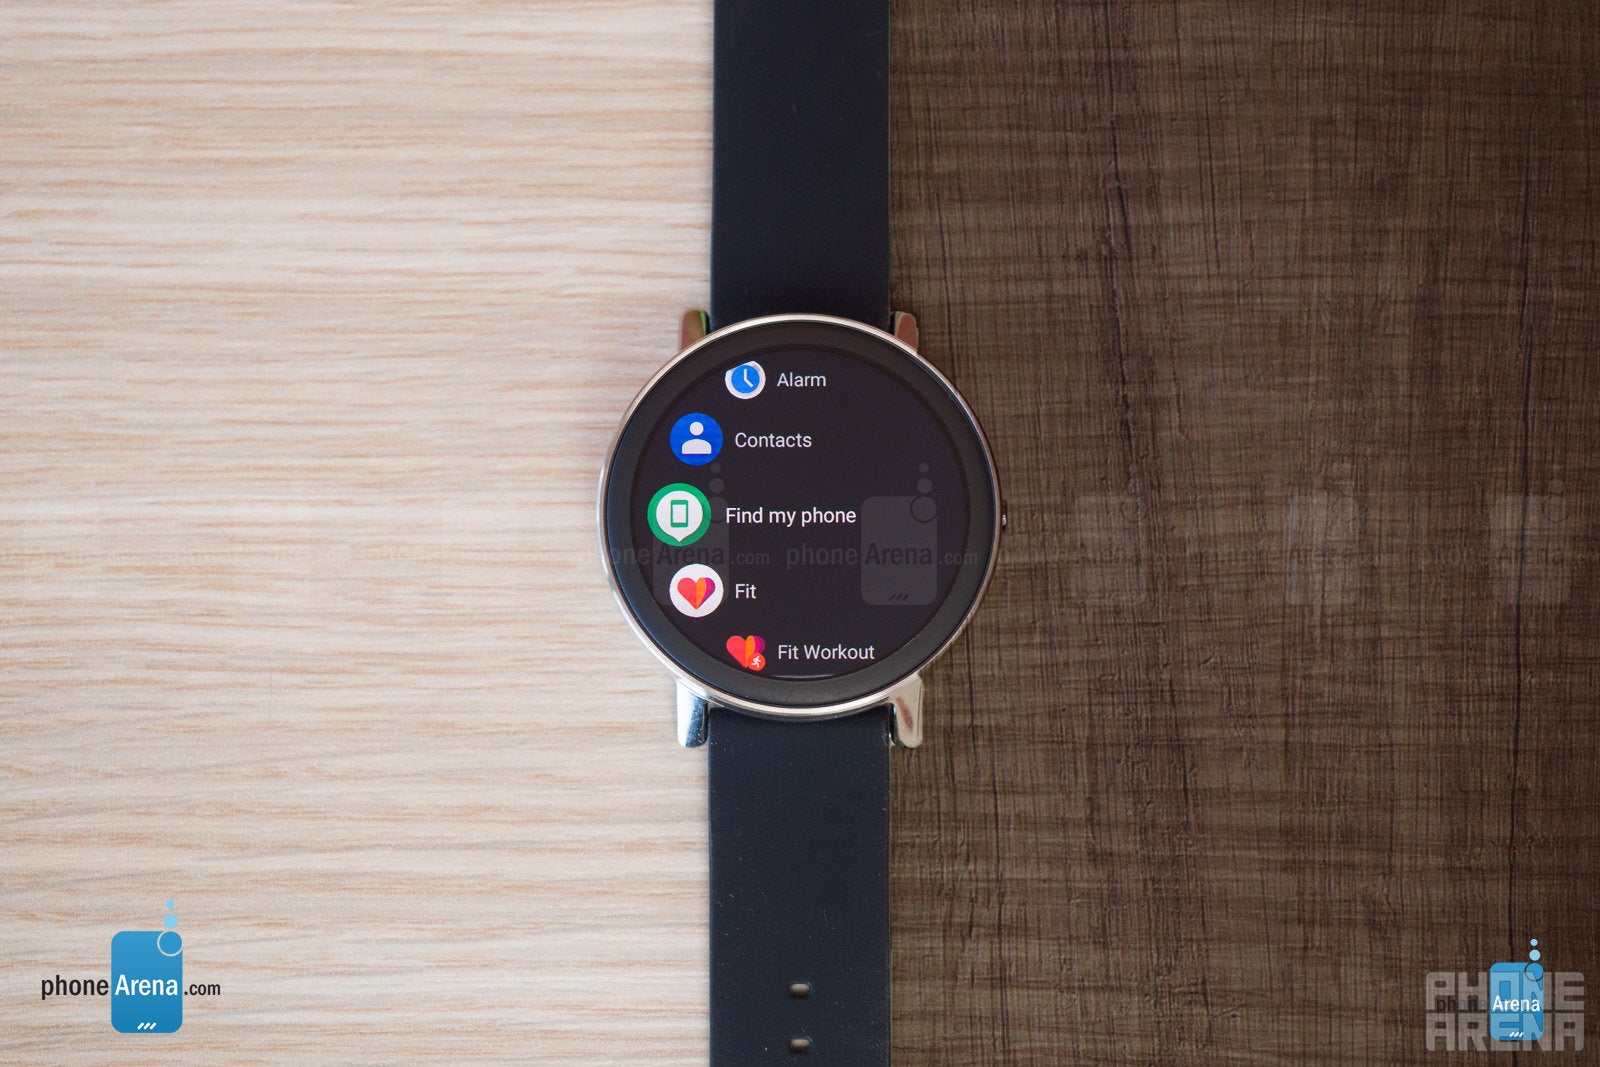 Google Pixel watch rumor review: price, release date, and new features